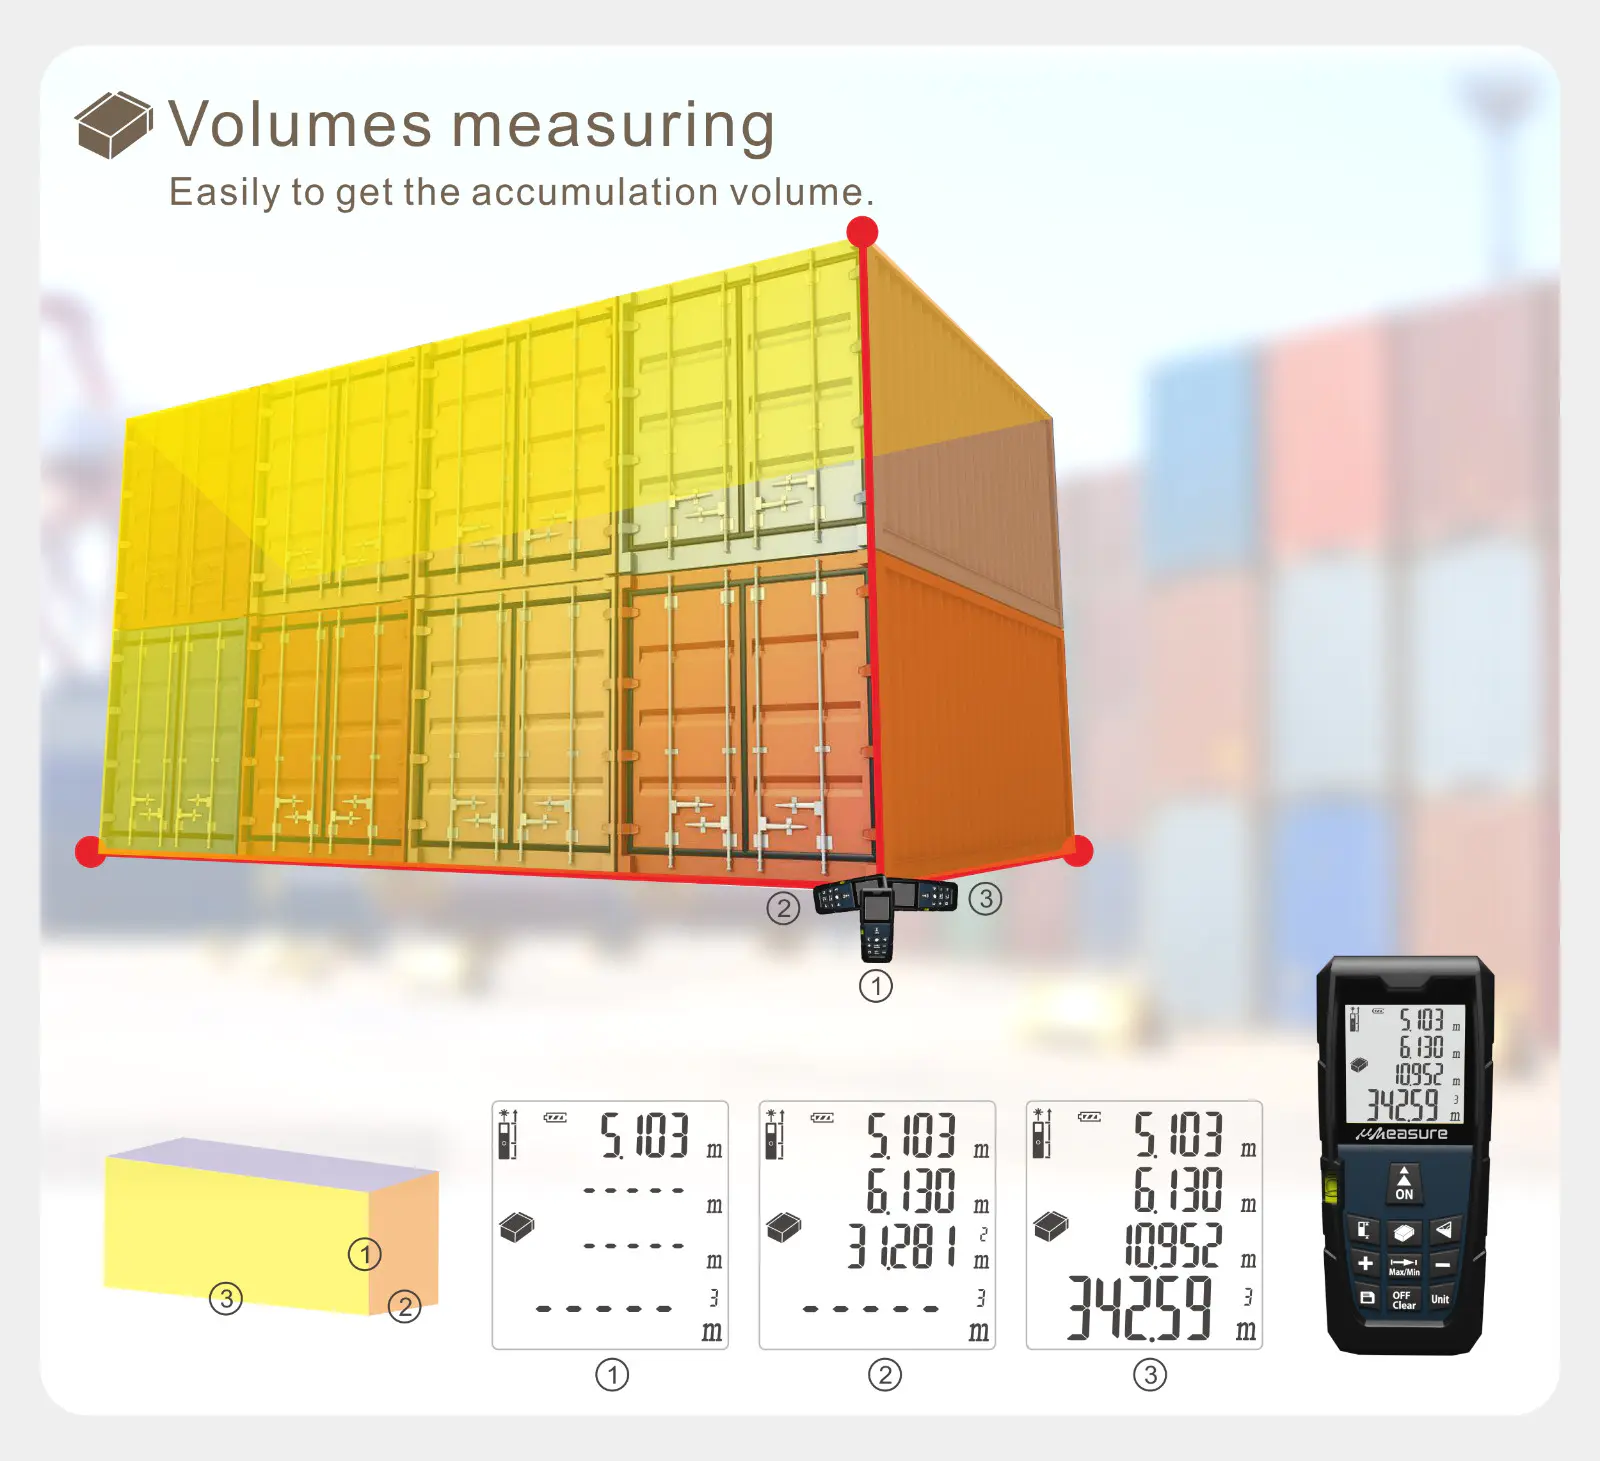 UMeasure cross laser distance measurer high-accuracy for wholesale